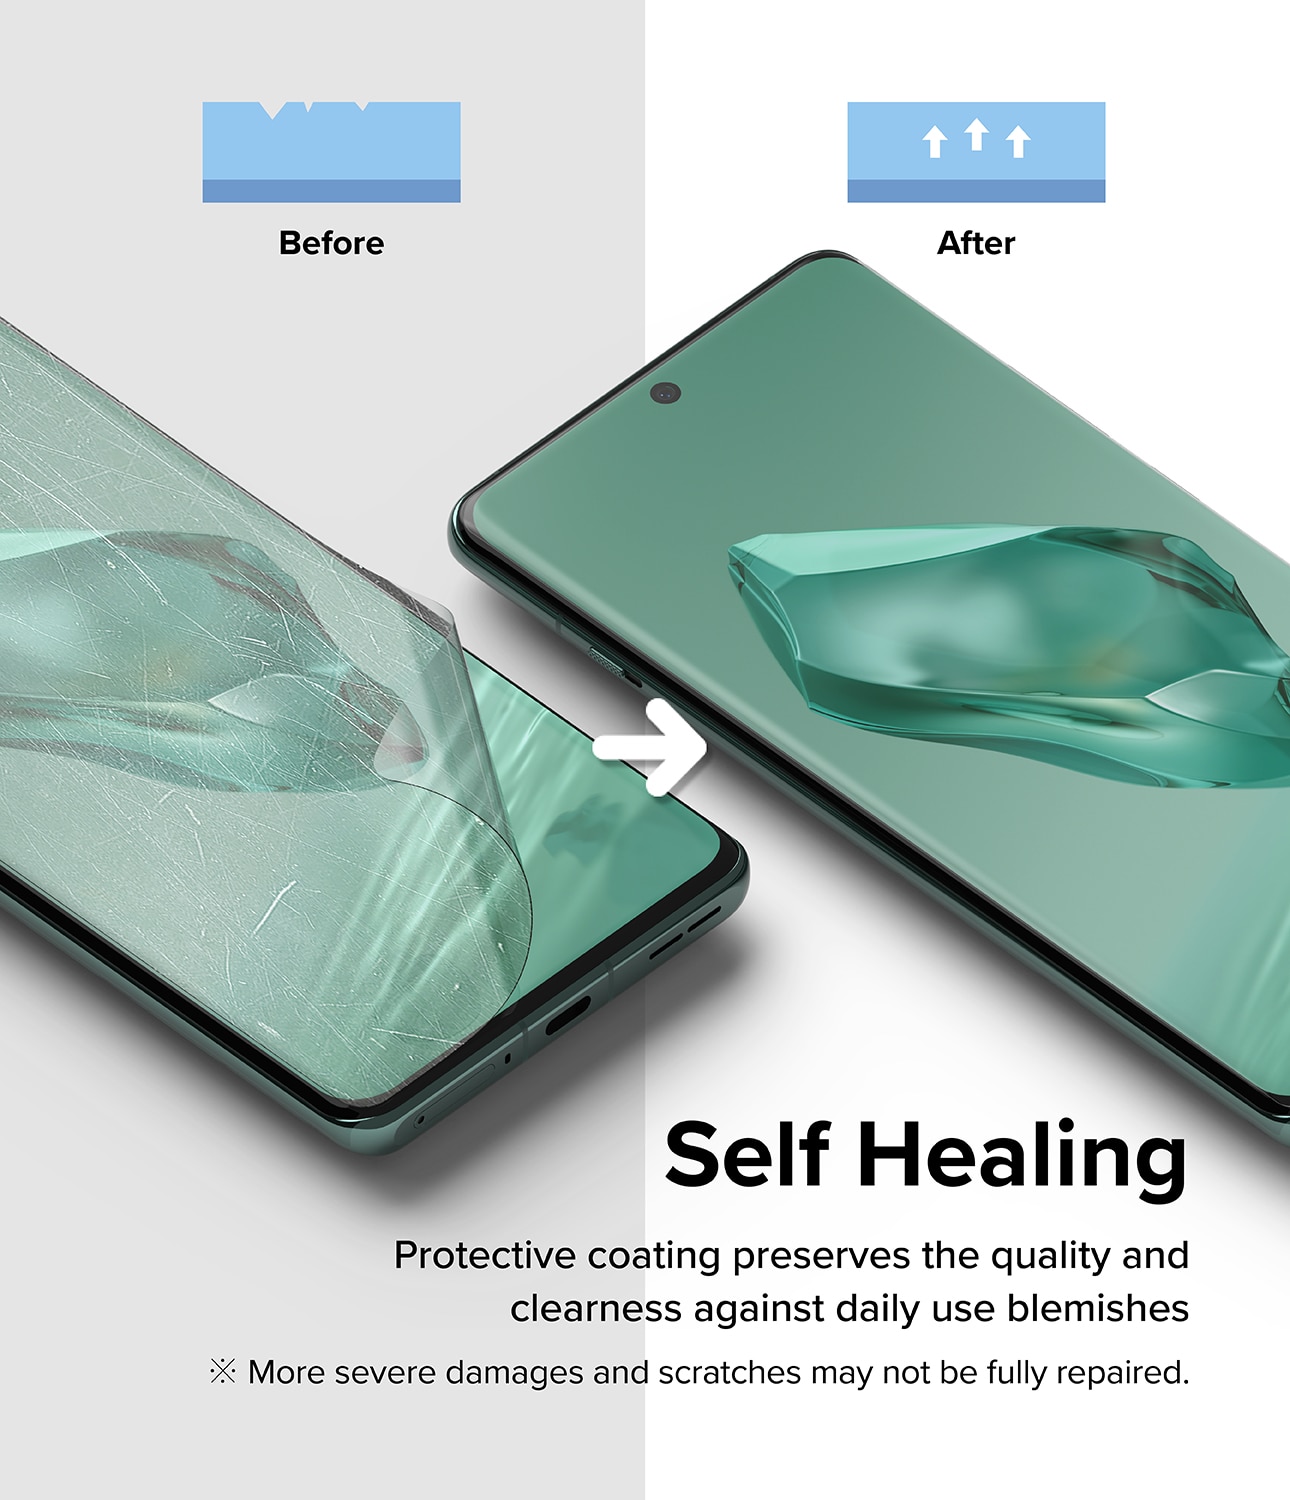 Dual Easy Screen Protector (2-pack) OnePlus 12